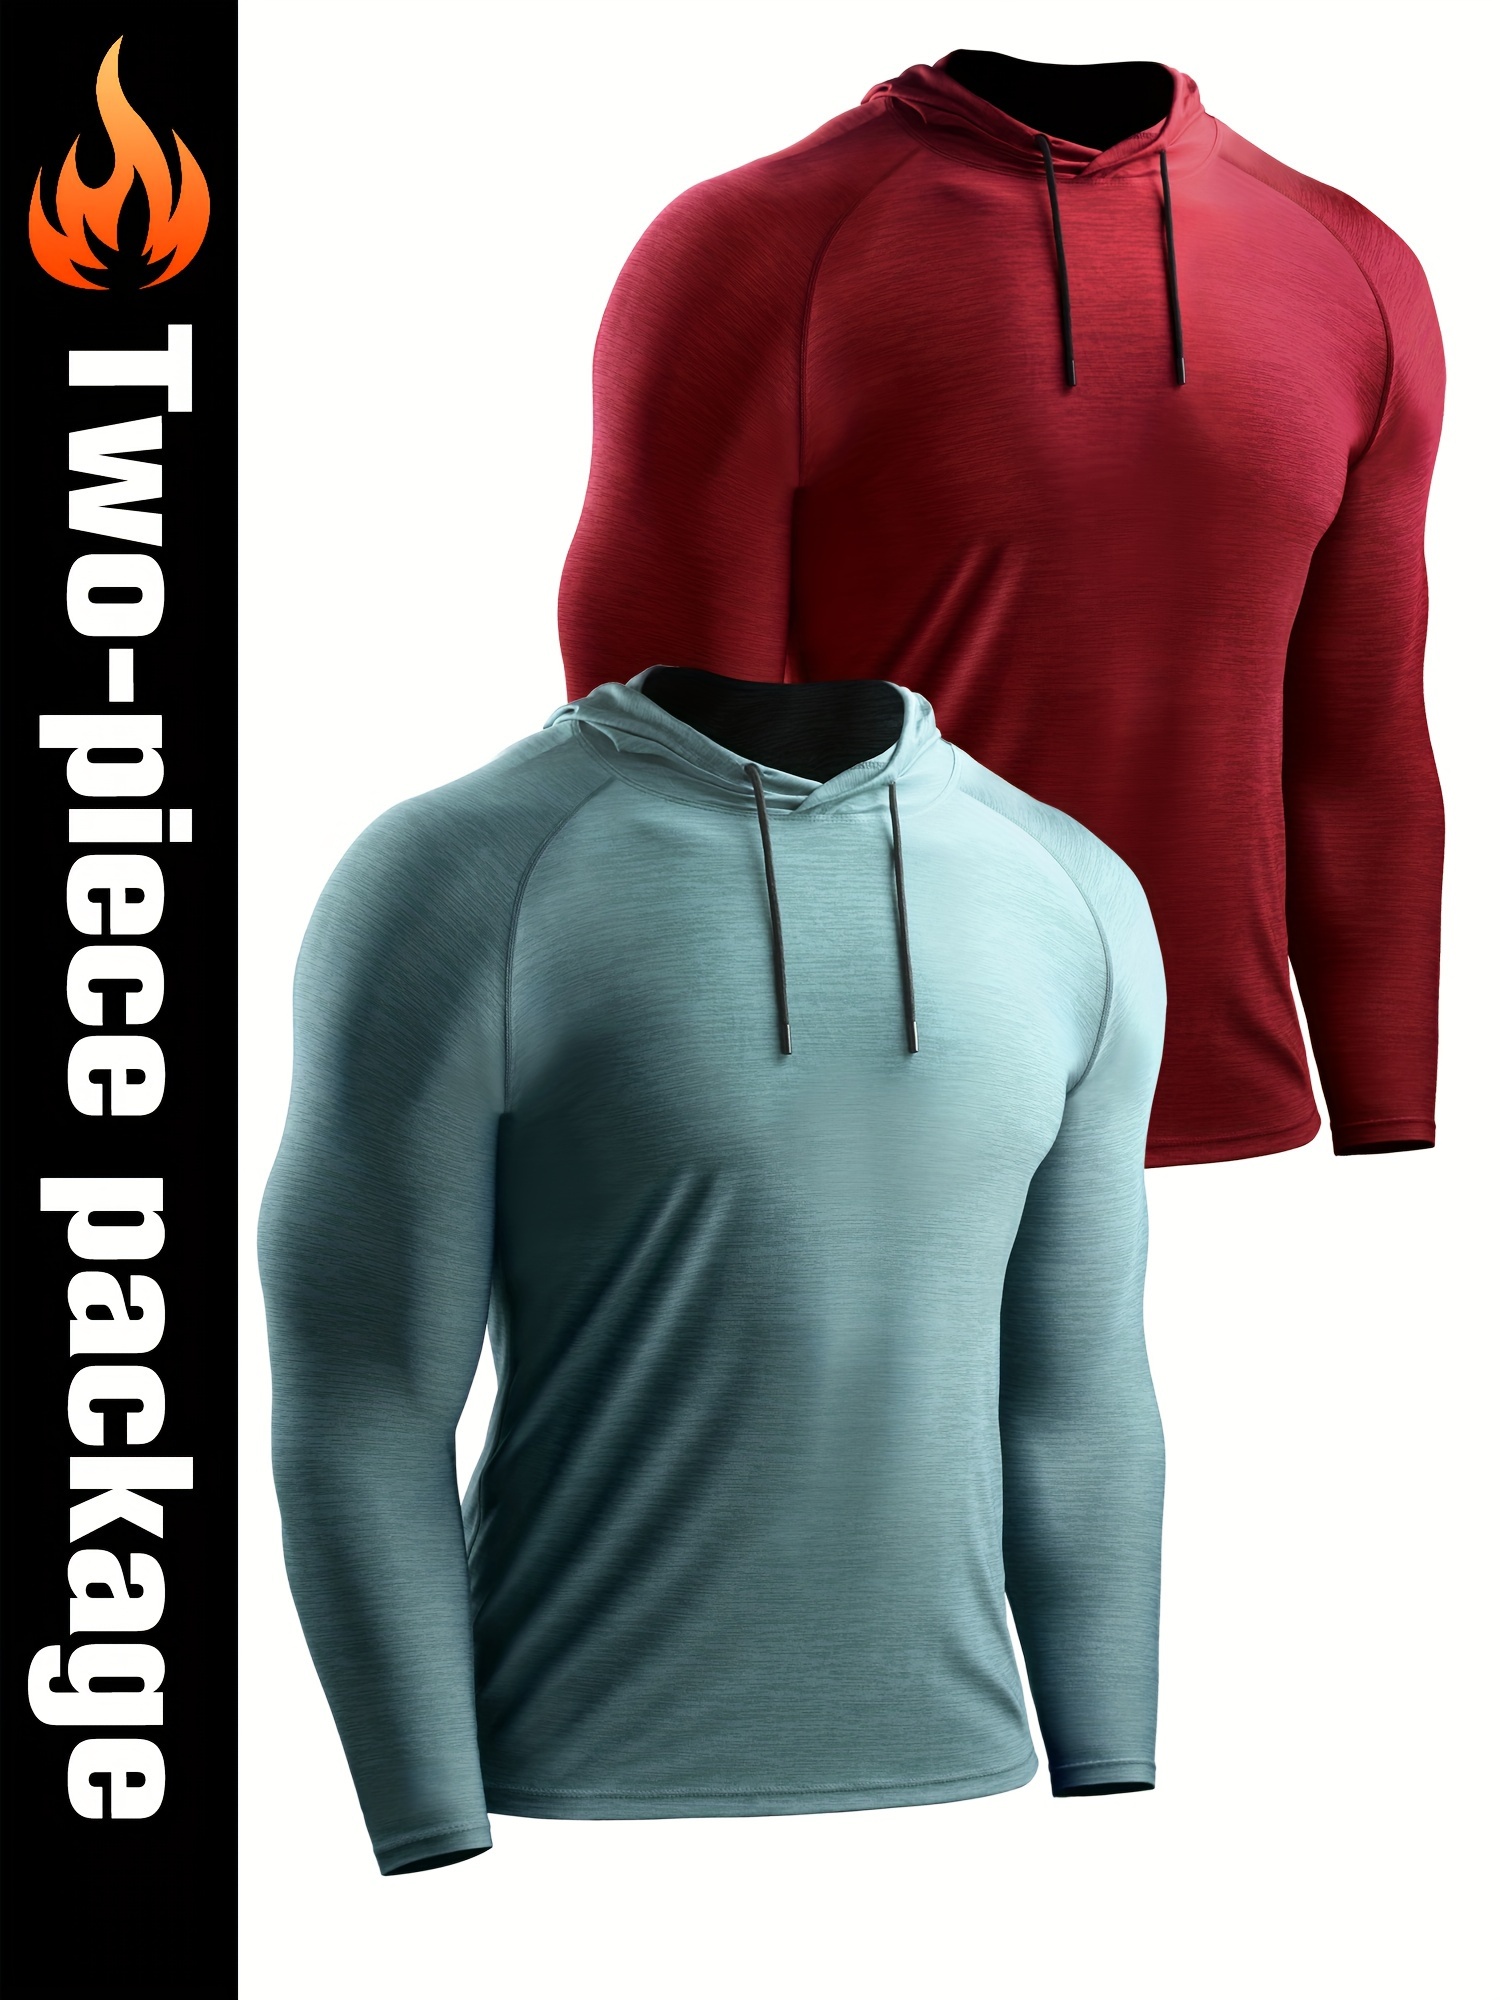 Men's Casual Sports Long Sleeve T-shirt Gym Fitness Running